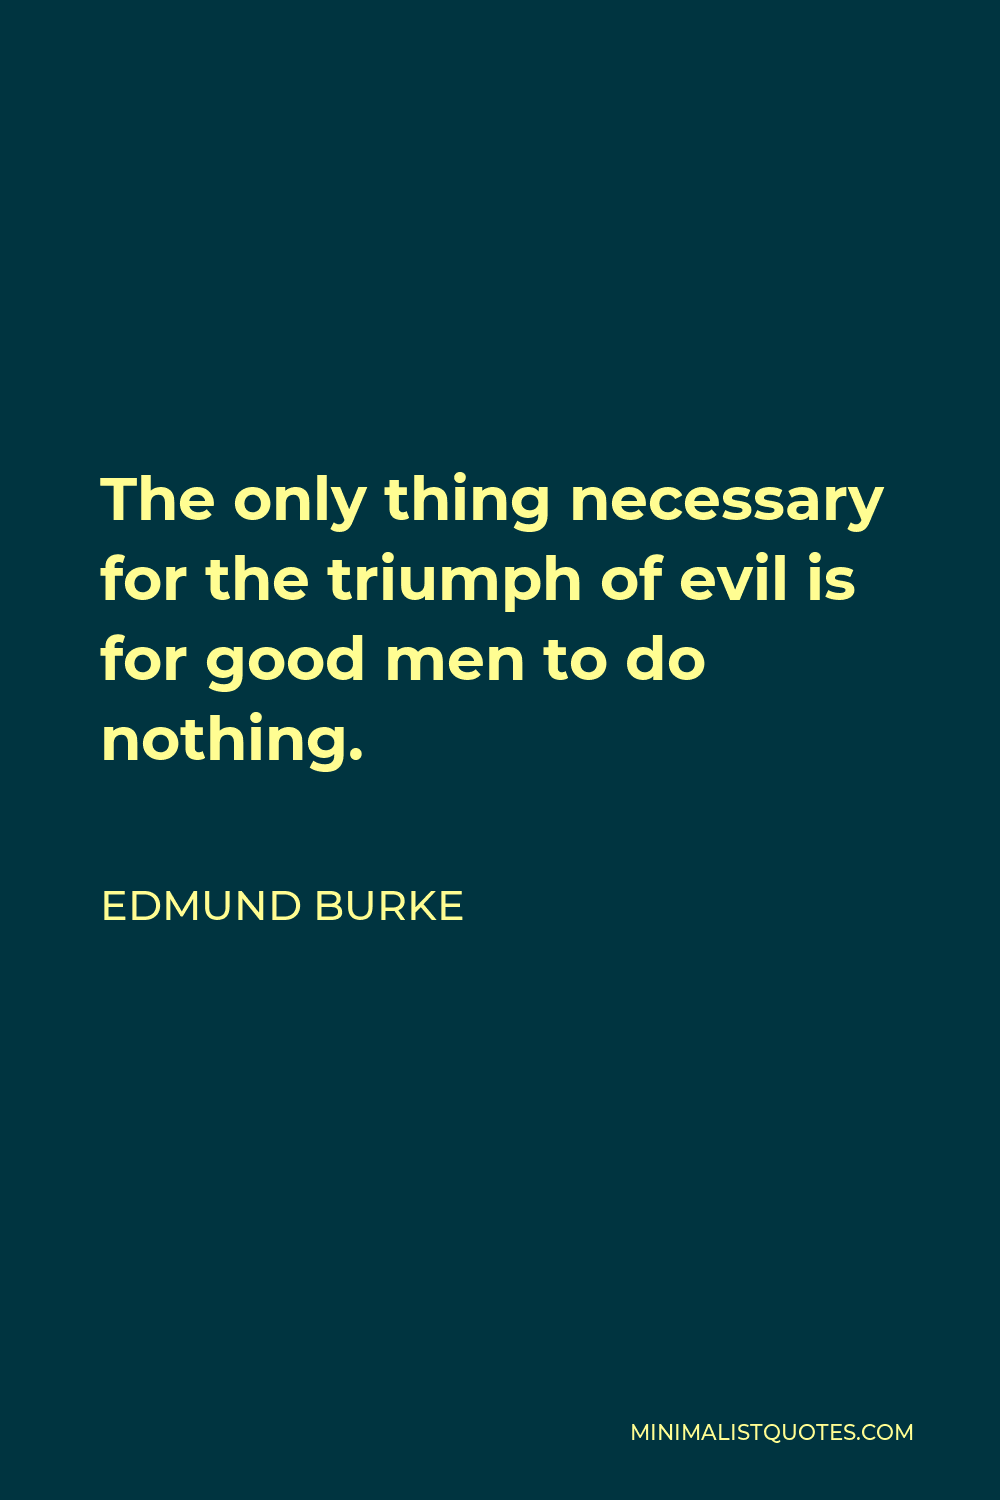 Edmund Burke Quote - The only thing necessary for the triumph of evil is for good men to do nothing.